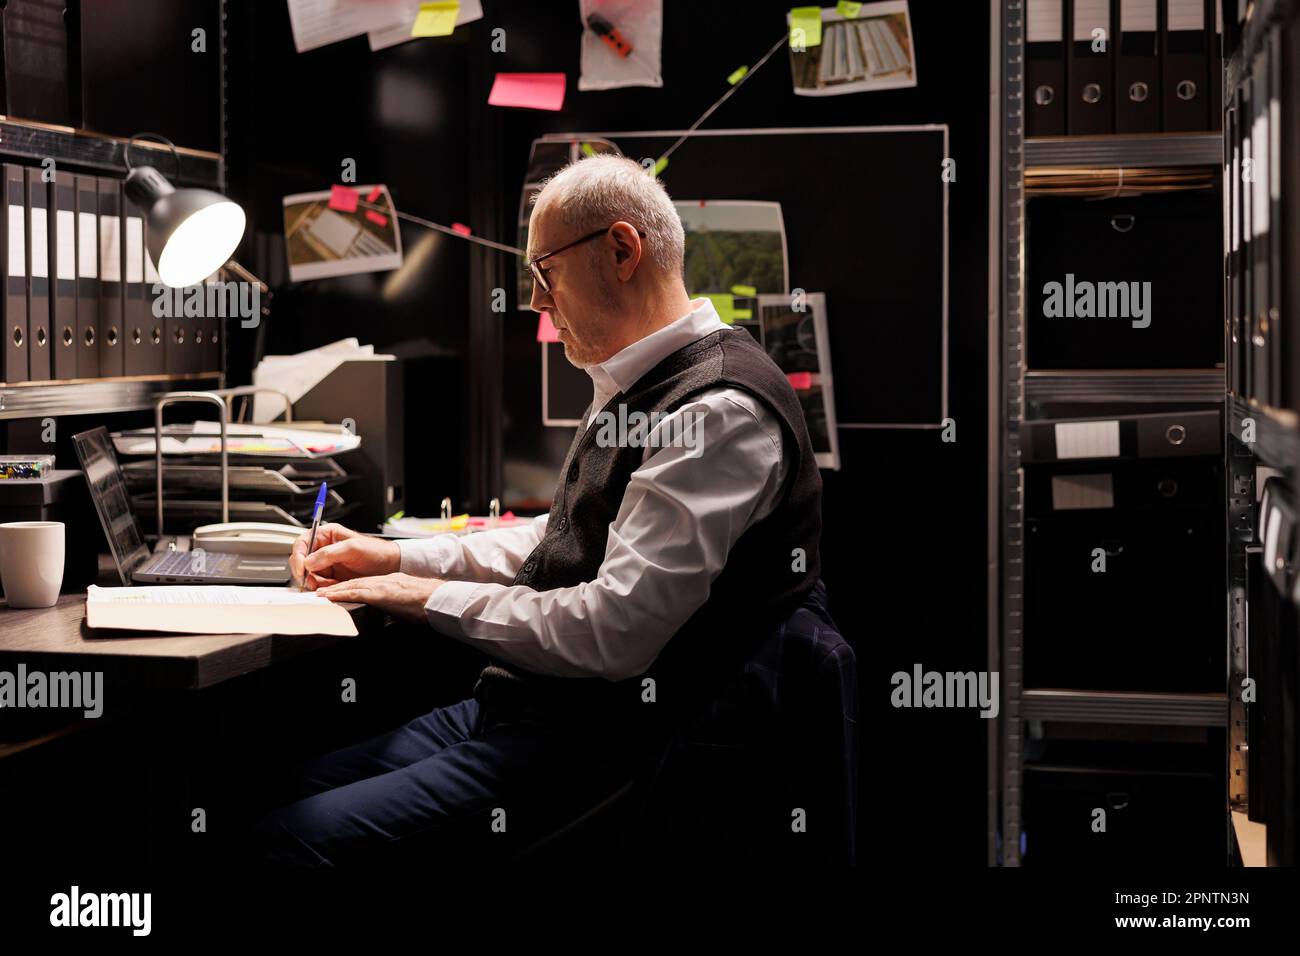 Elderly private detective writing missing person case report, working late at night at criminal case in arhive room. Old police officer analyzing criminology files, planning startegy to catch suspect Stock Photo